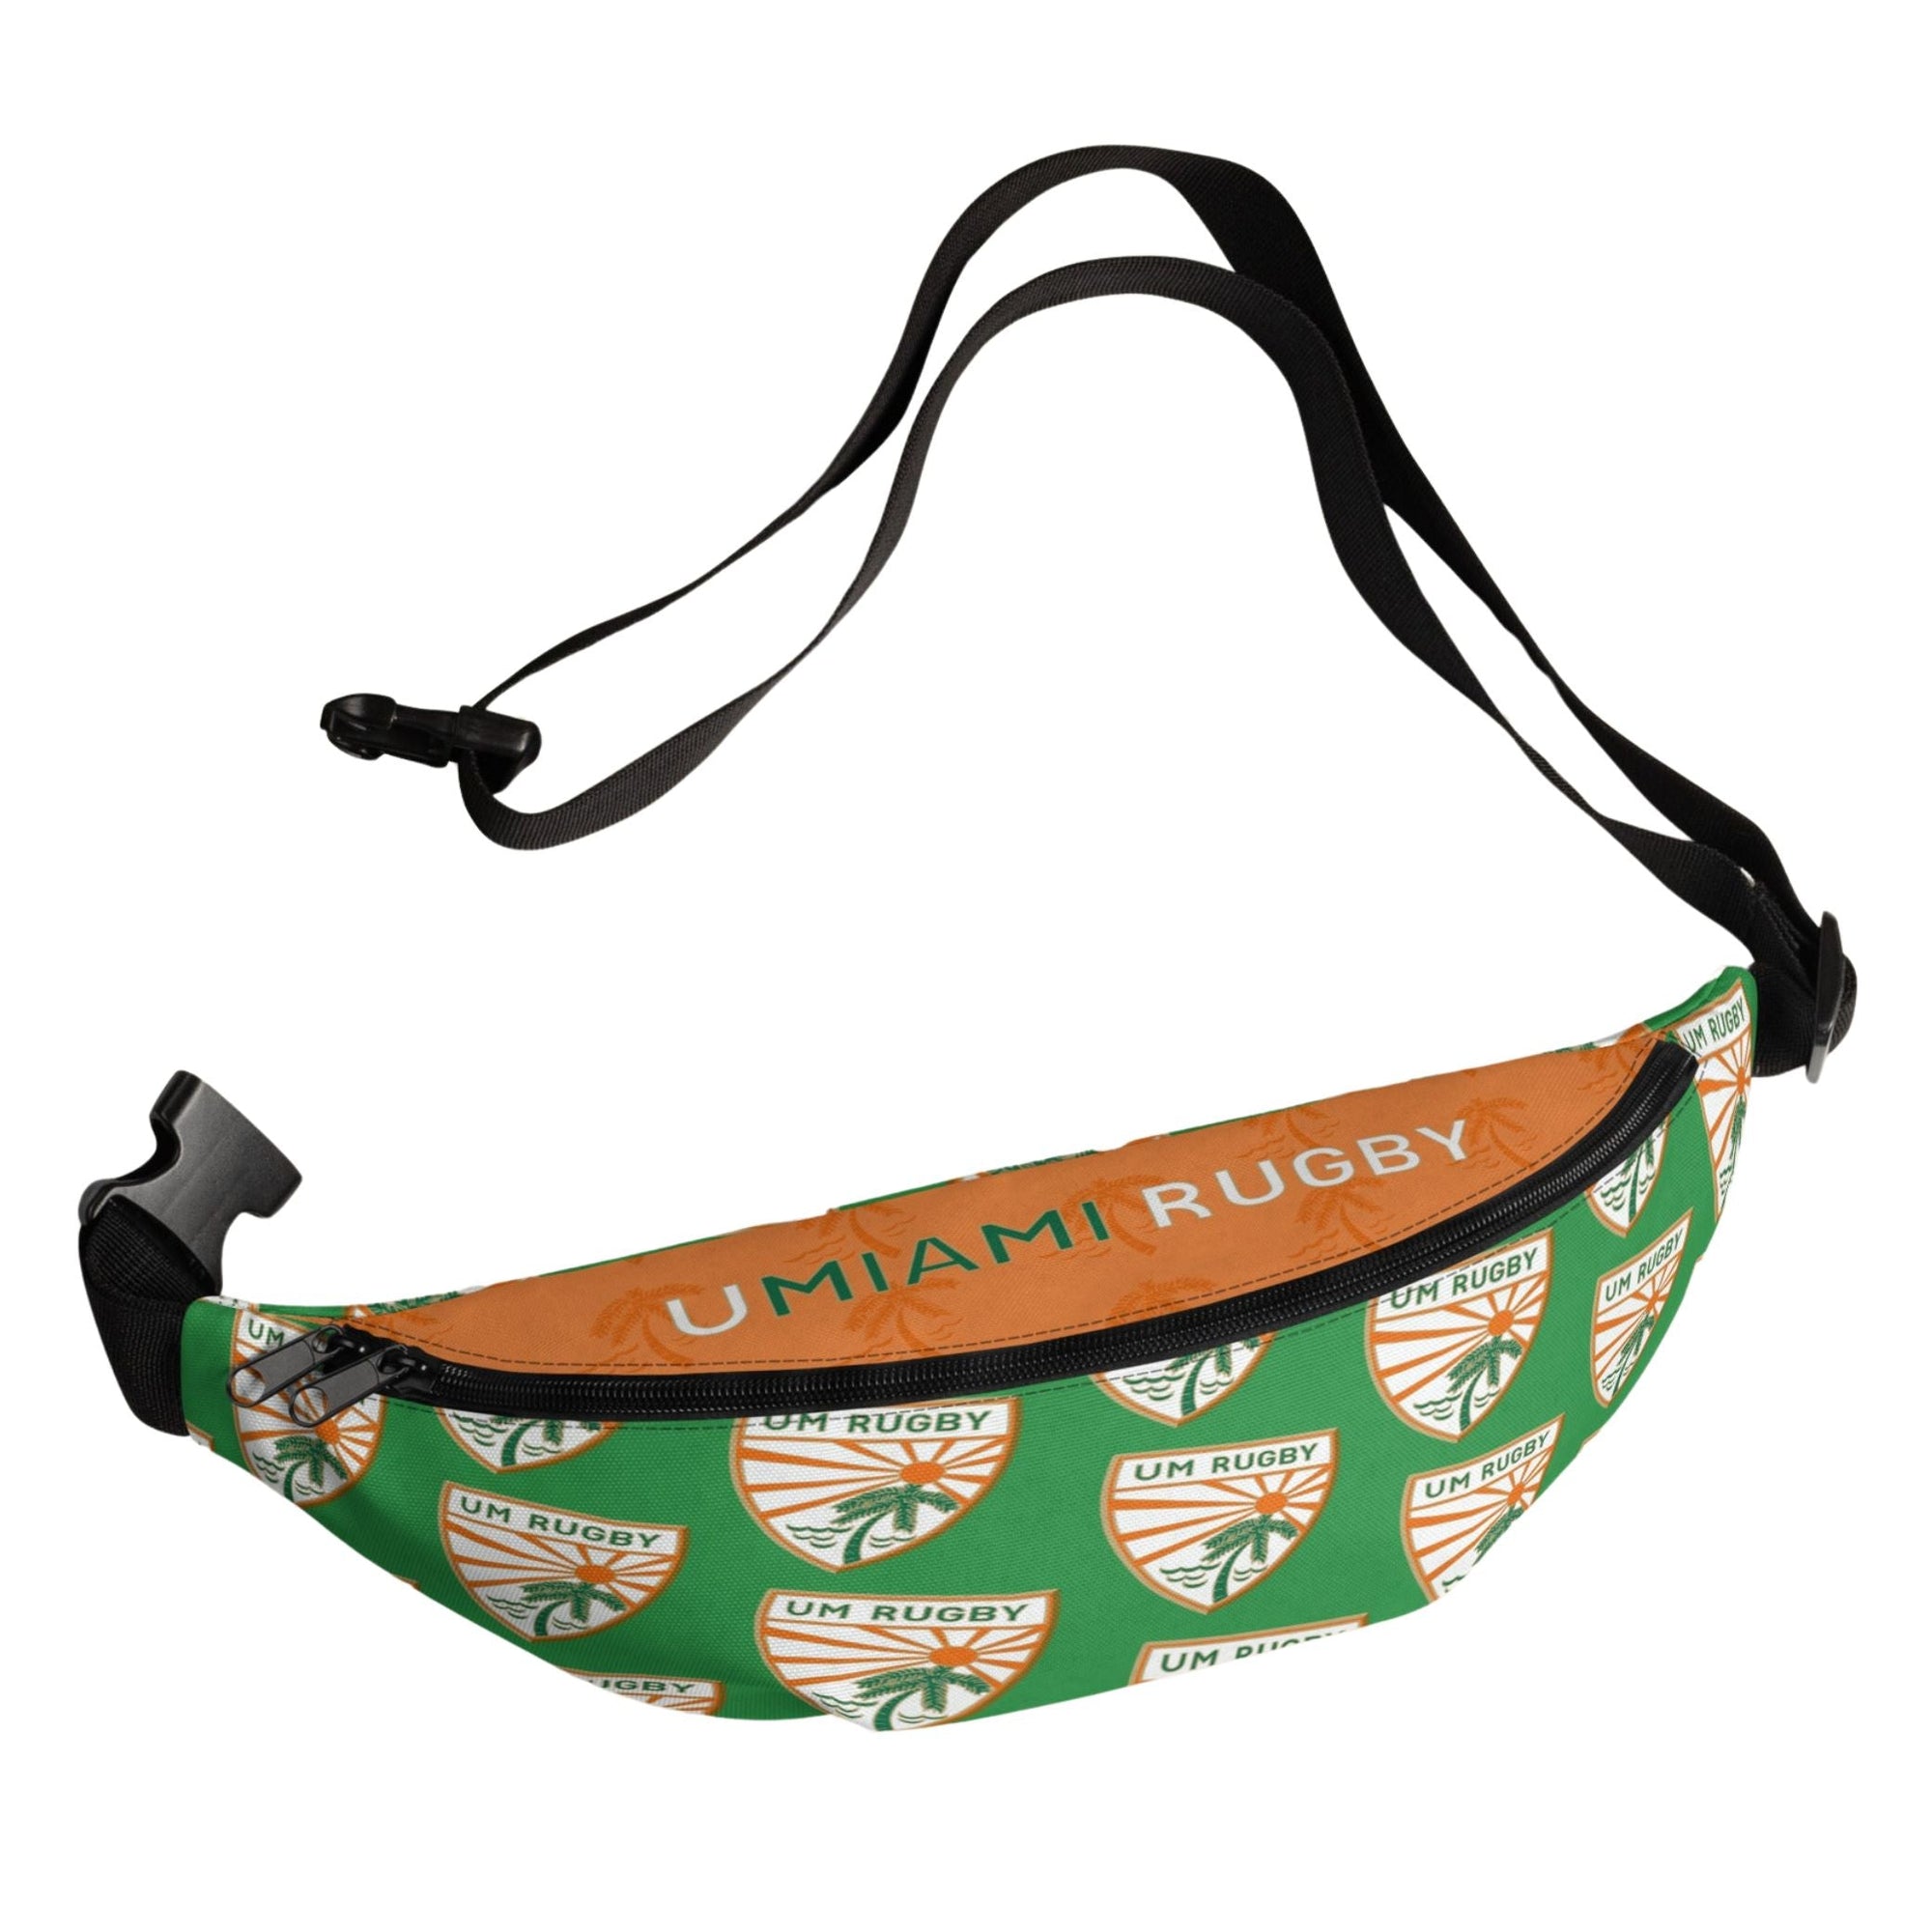 Rugby Imports UMiami Rugby Fanny Pack